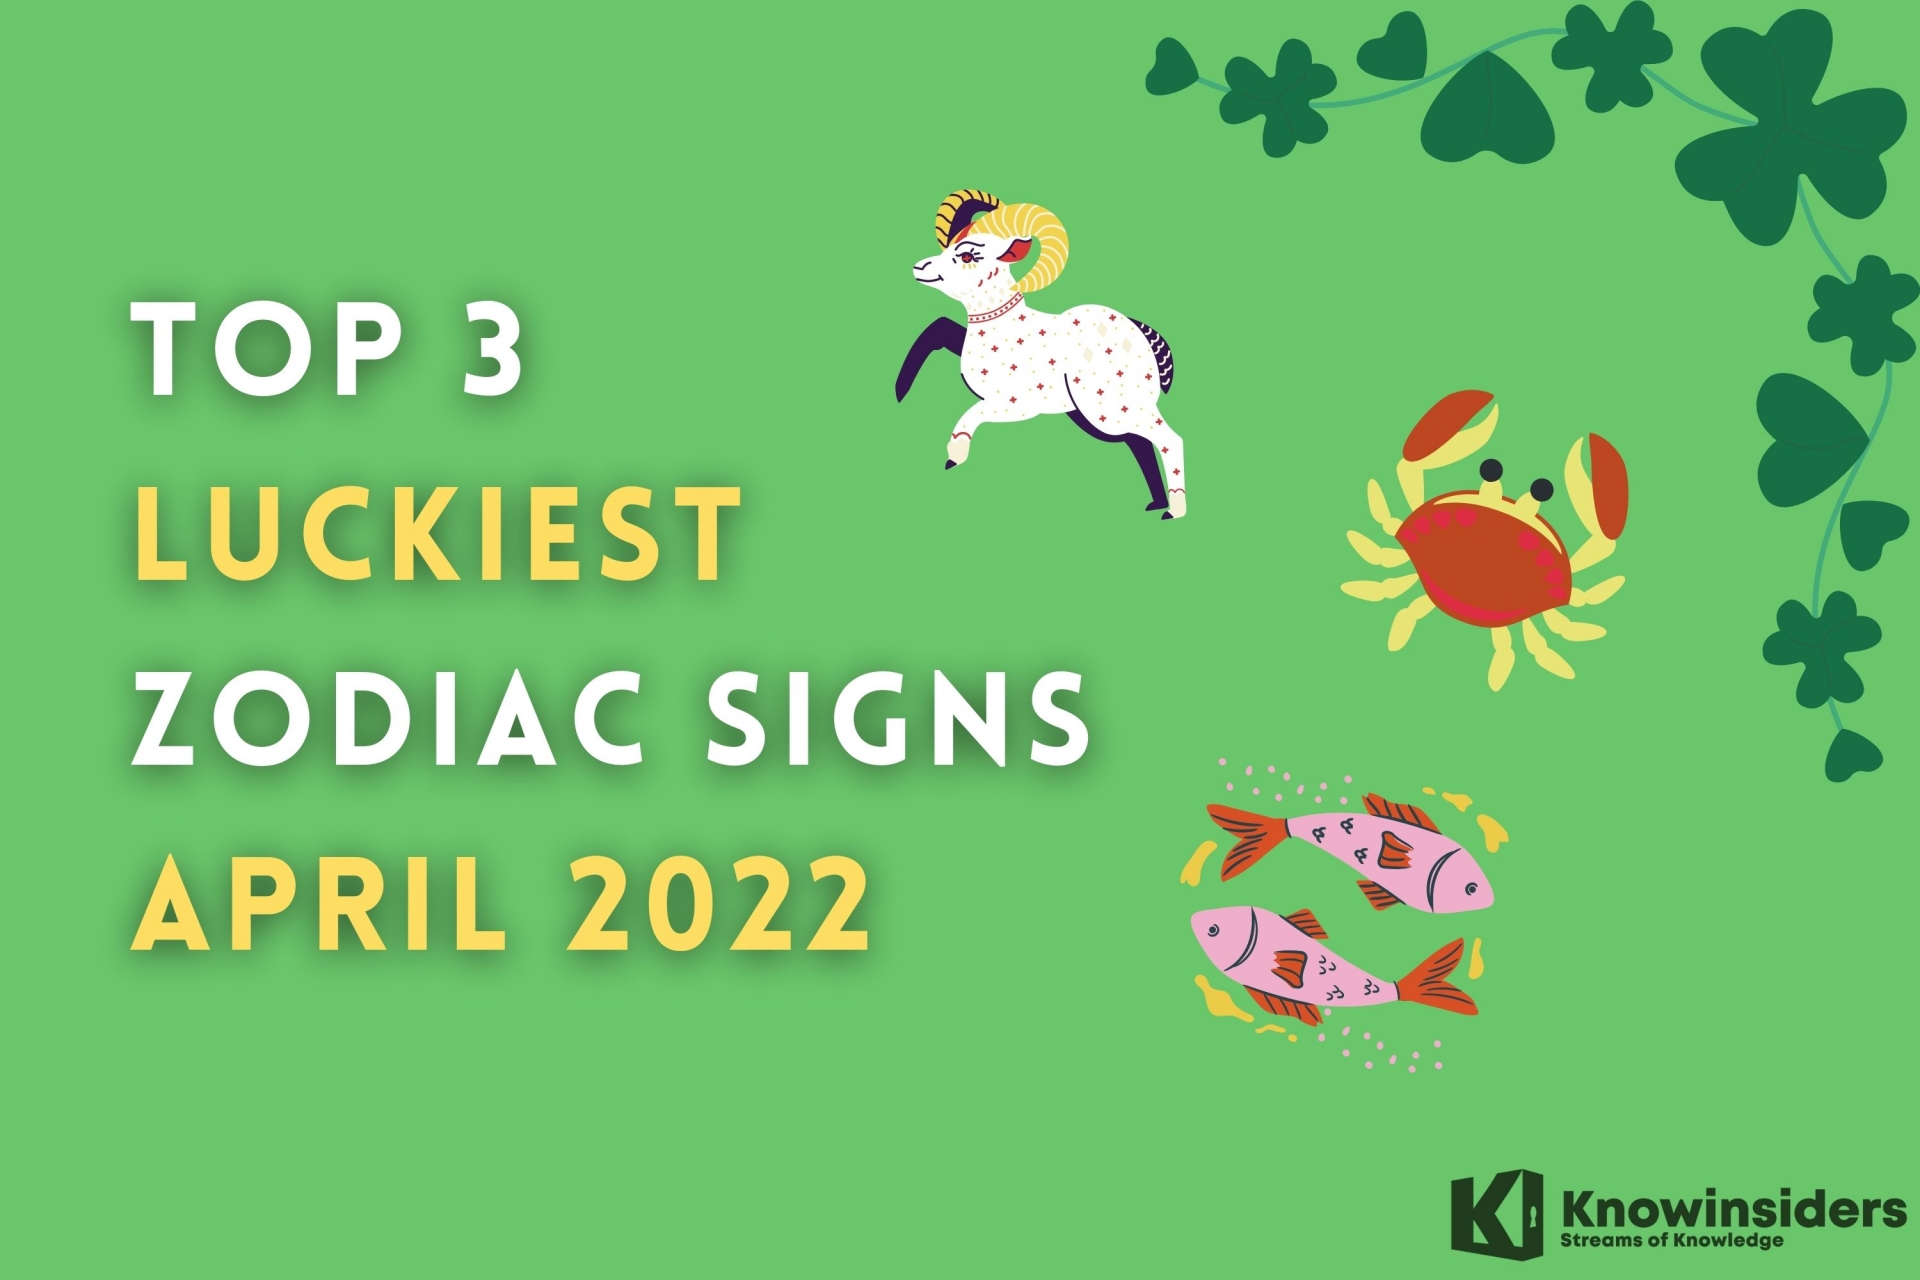 3 Luckiest Zodiac Signs in April 2022 - According to Astrology